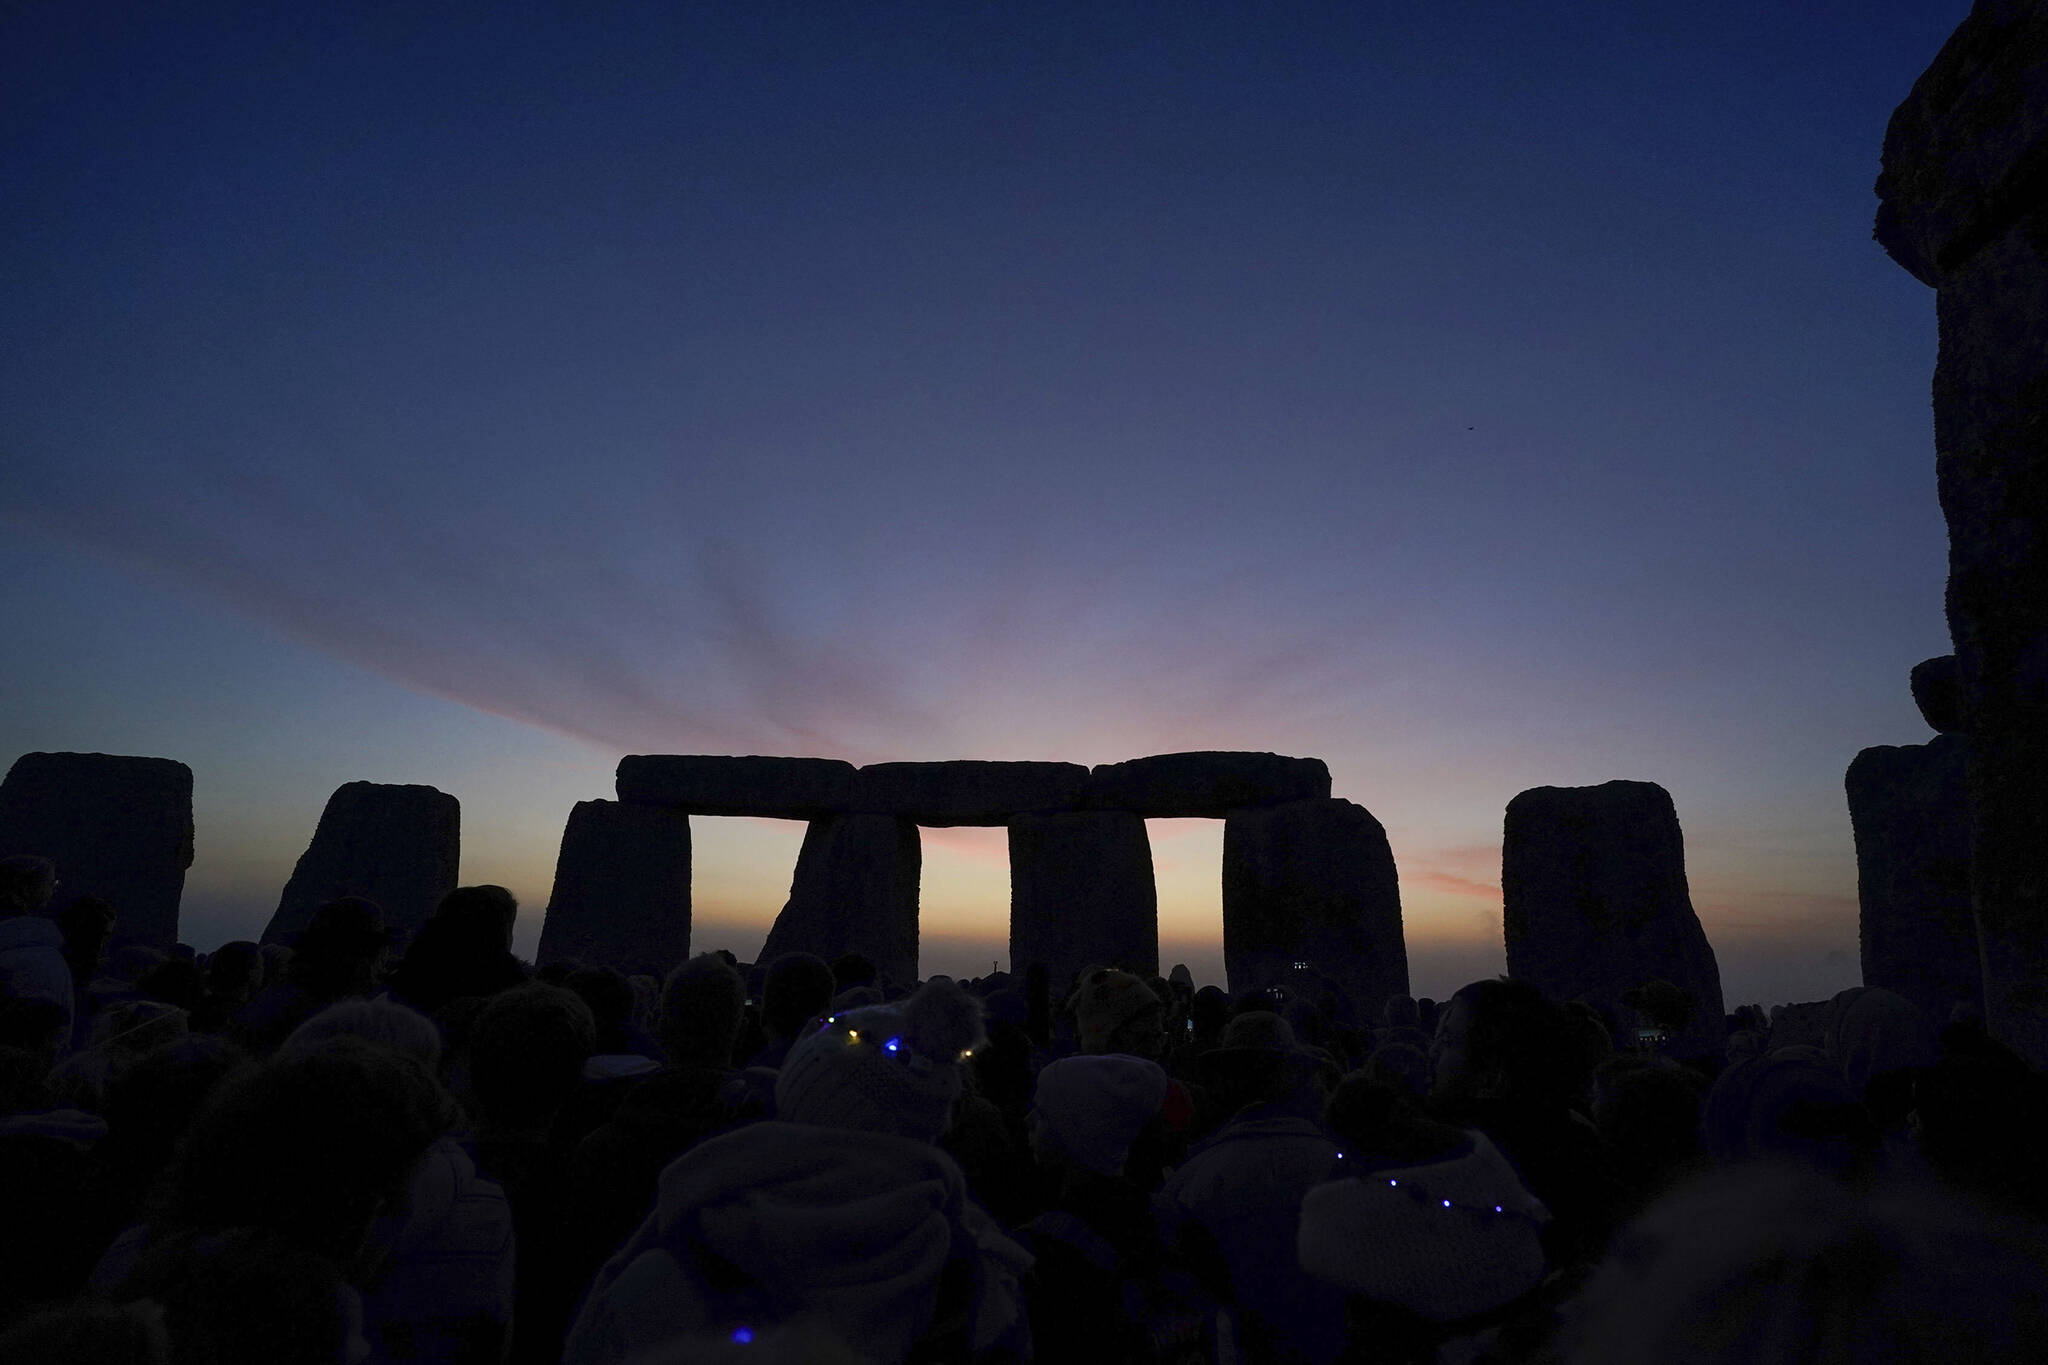 Dawn breaks behind the stones during the Summer Solstice festivities at Stonehenge in Wiltshire, England, Tuesday, June 21, 2022. After two years of closure due to the COVID-19 pandemic, Stonehenge reopened Monday for the Summer Solstice celebrations. (Andrew Matthews/PA via AP)